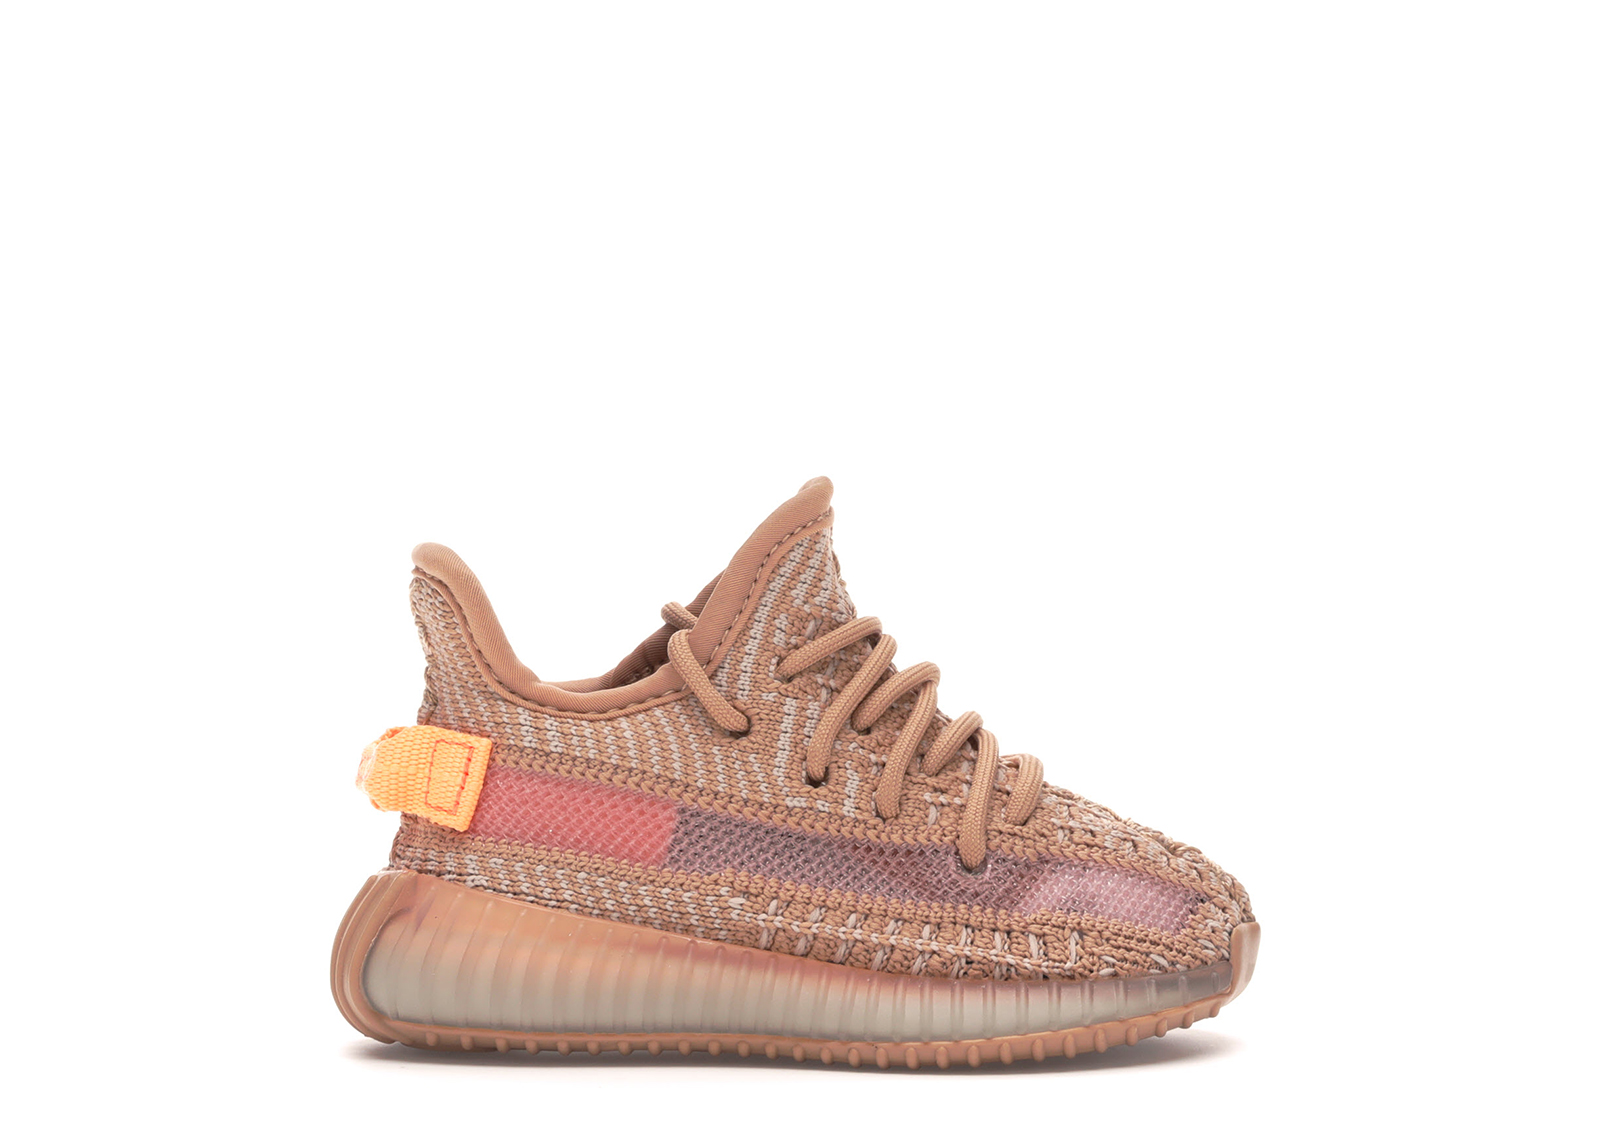 clay yeezy toddler